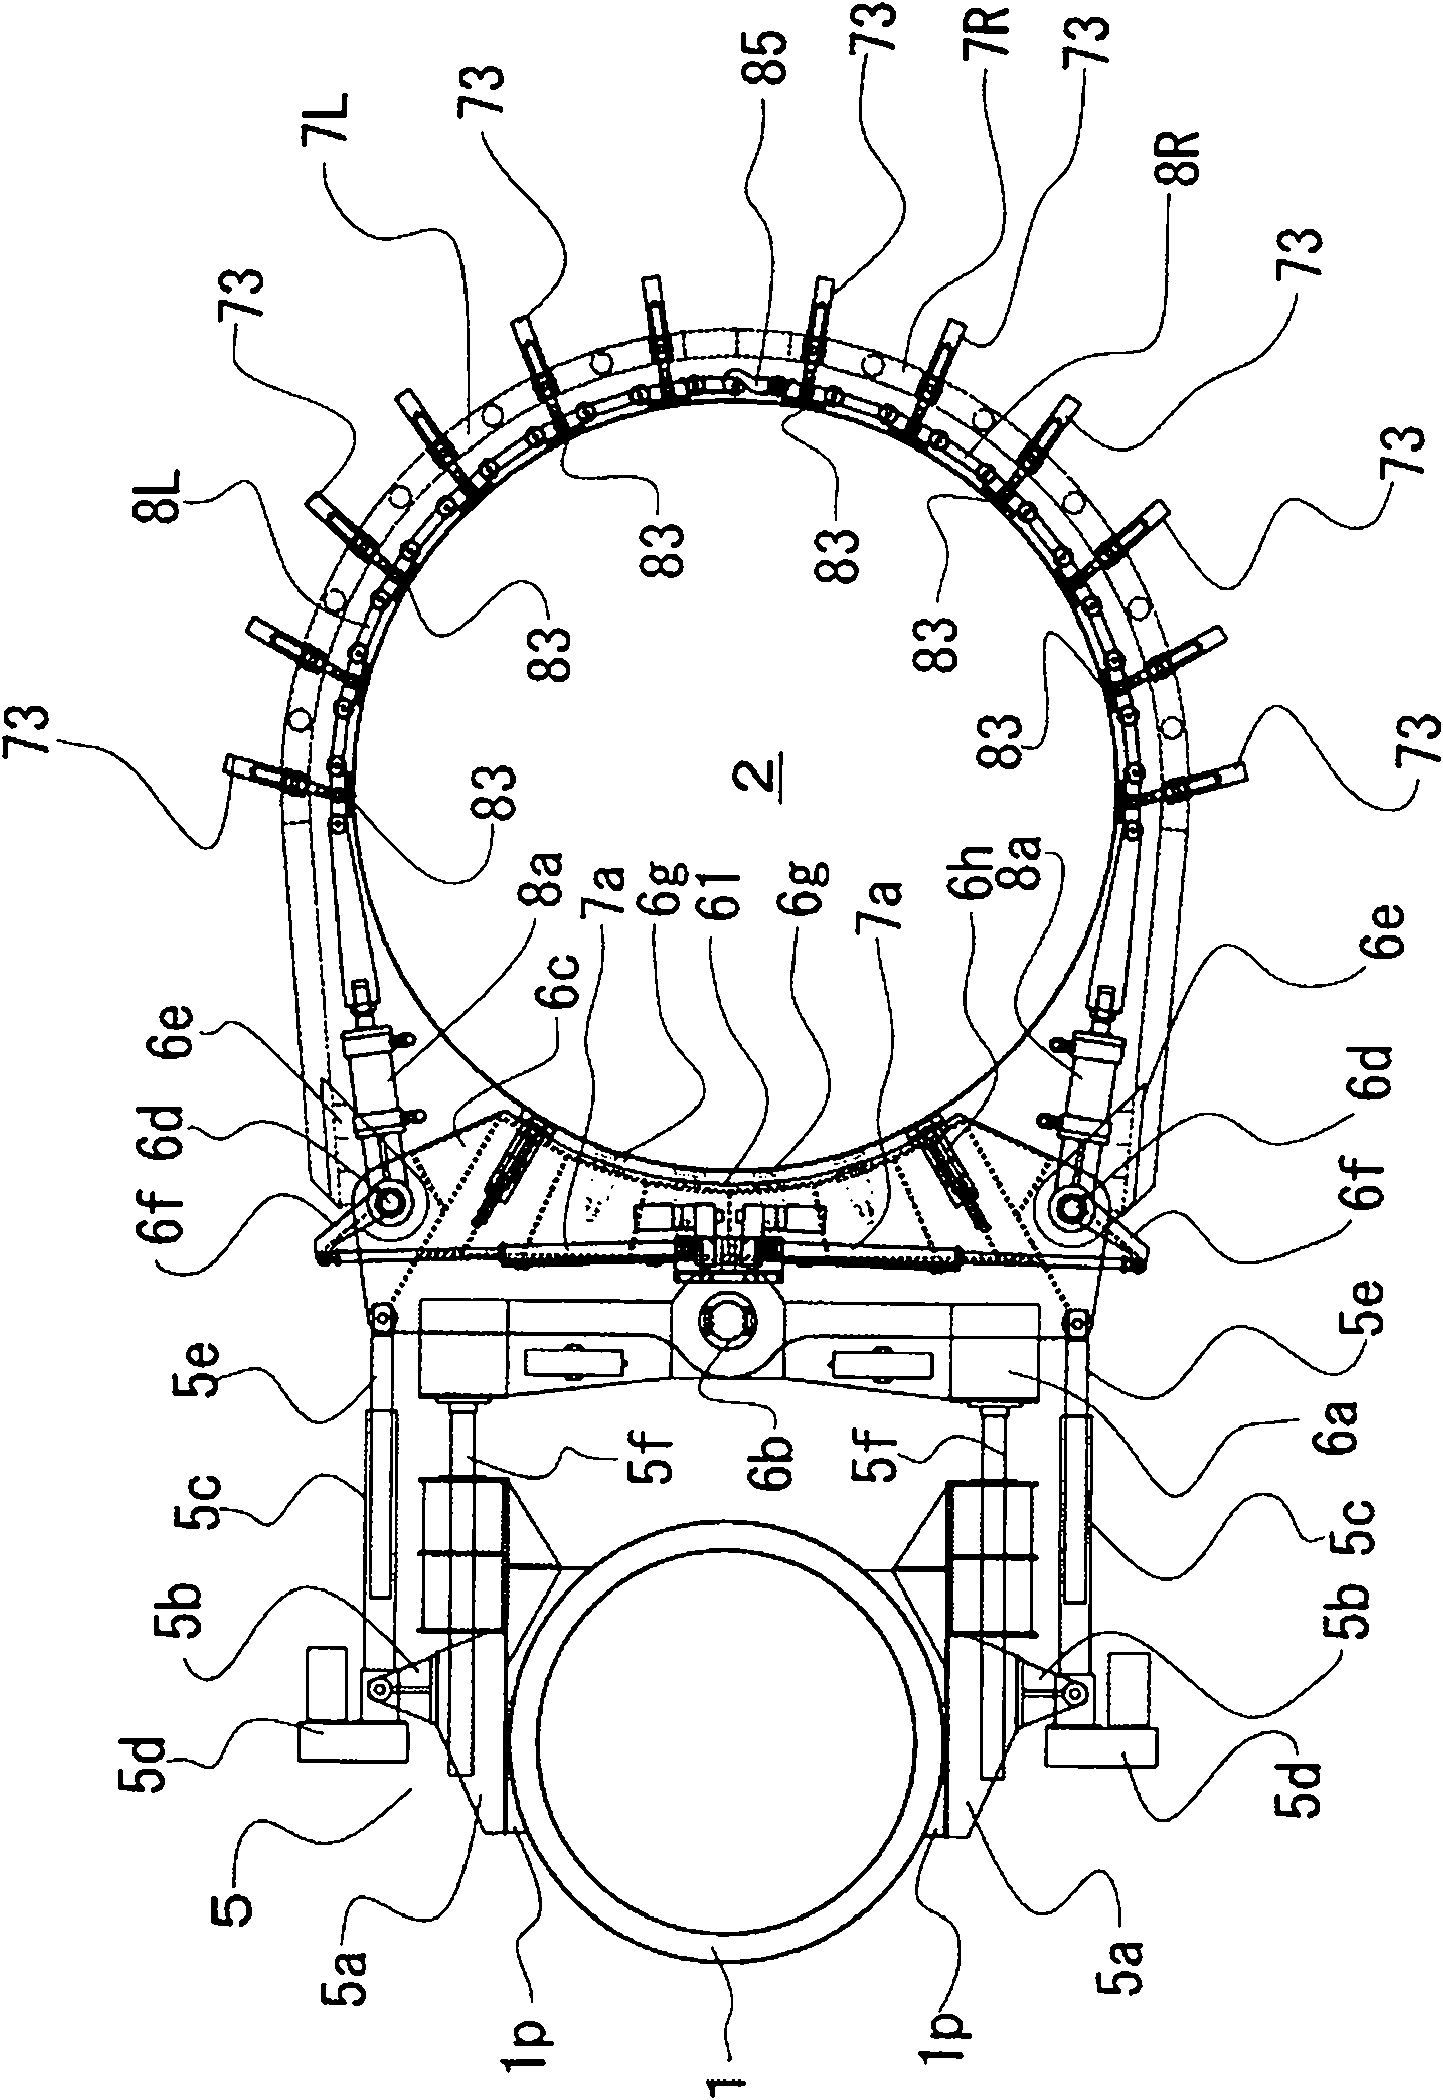 Apparatus for supporting telescopic boom for mounting crane to construct pillar of tower shaped structure and method for constructing pillar